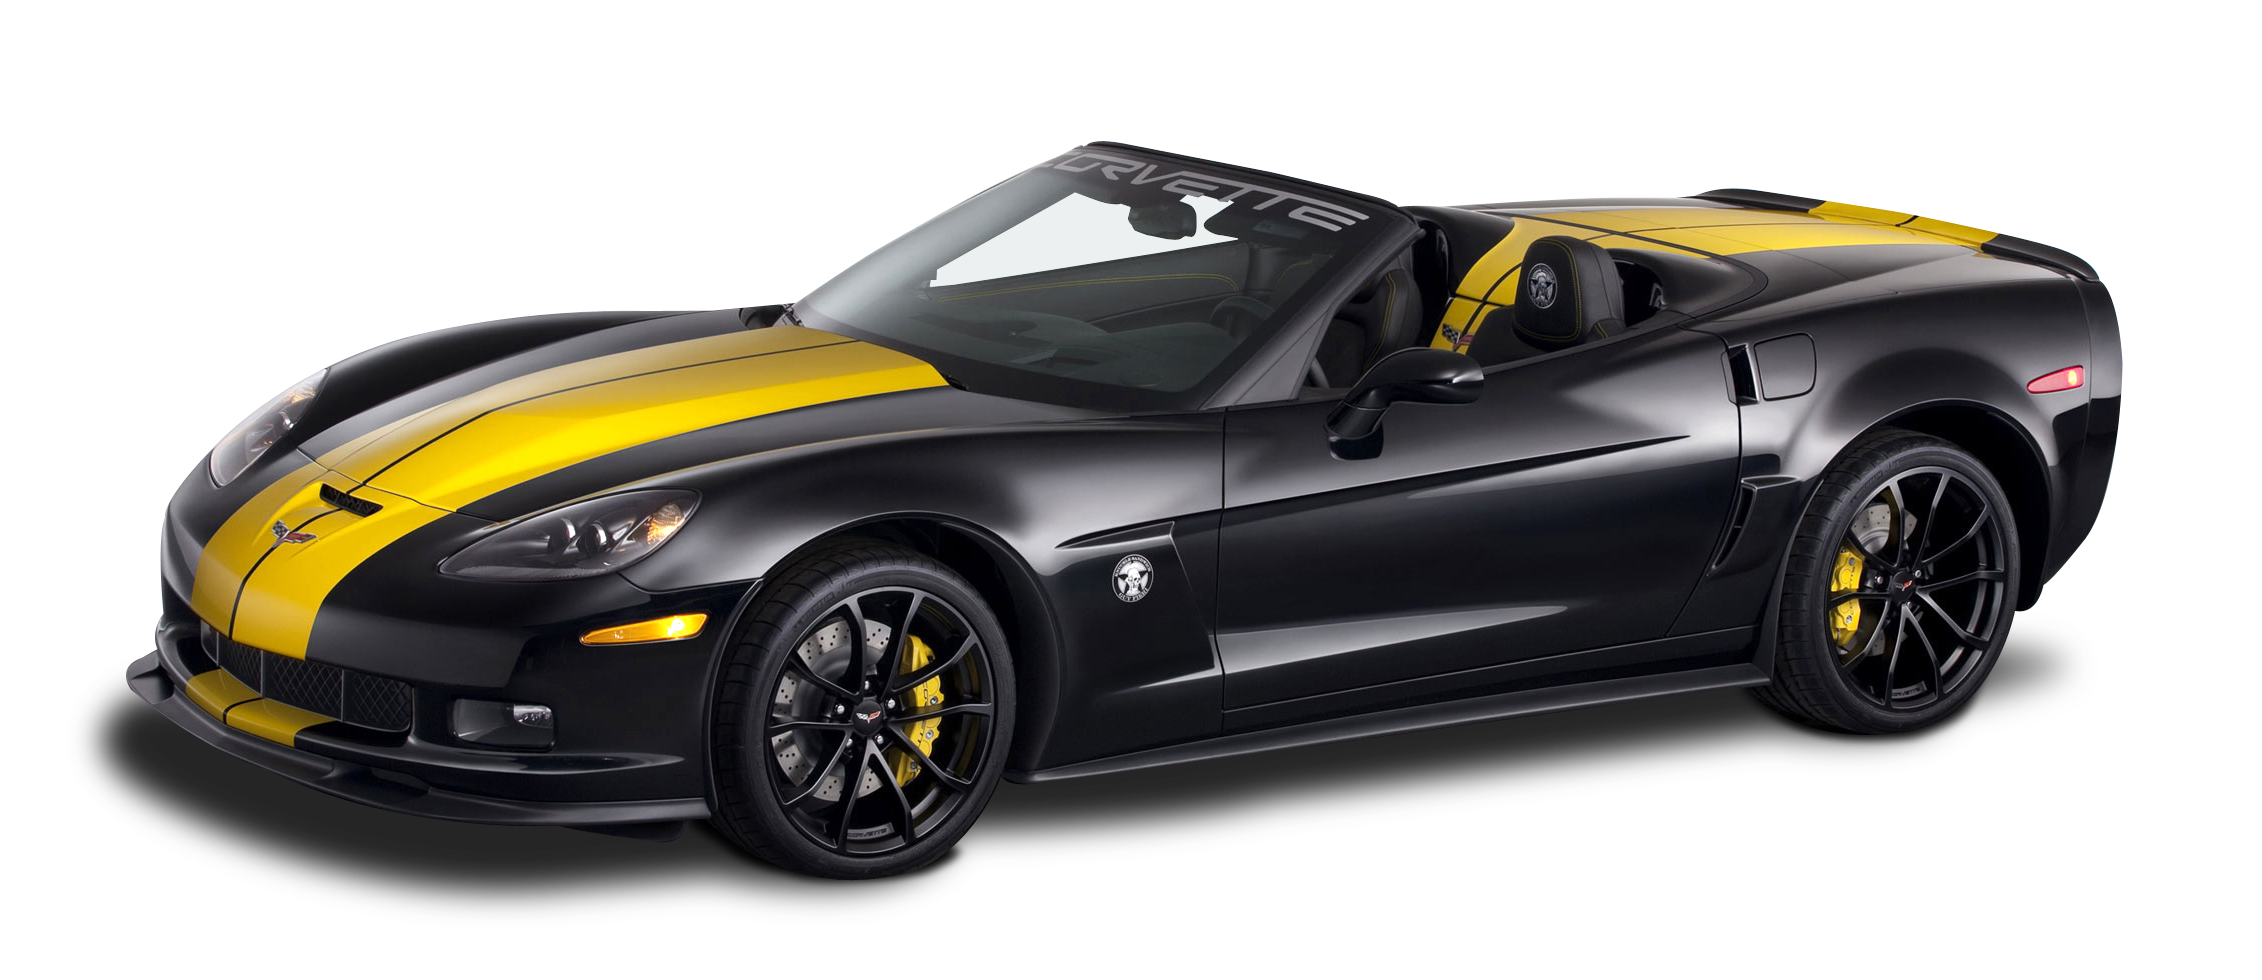 A Black And Yellow Sports Car